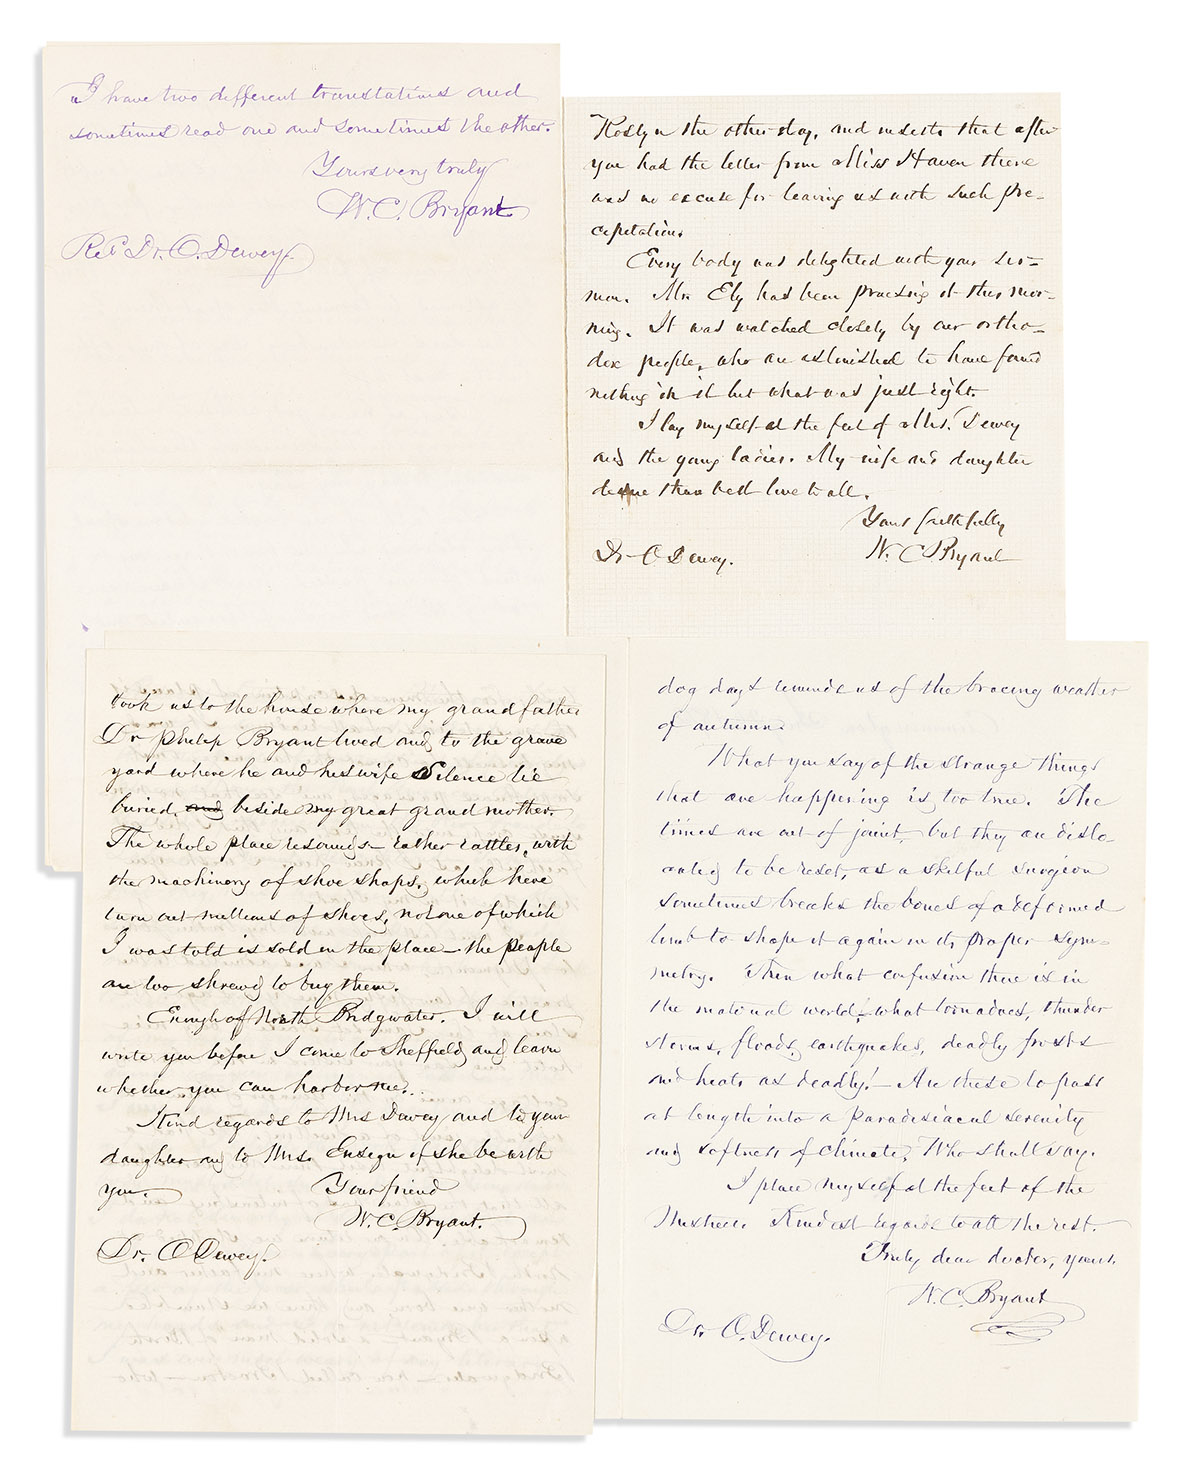 (MASSACHUSETTS.) Papers of the Unitarian minister Orville Dewey, including his diary and correspondence with William Cullen Bryant.